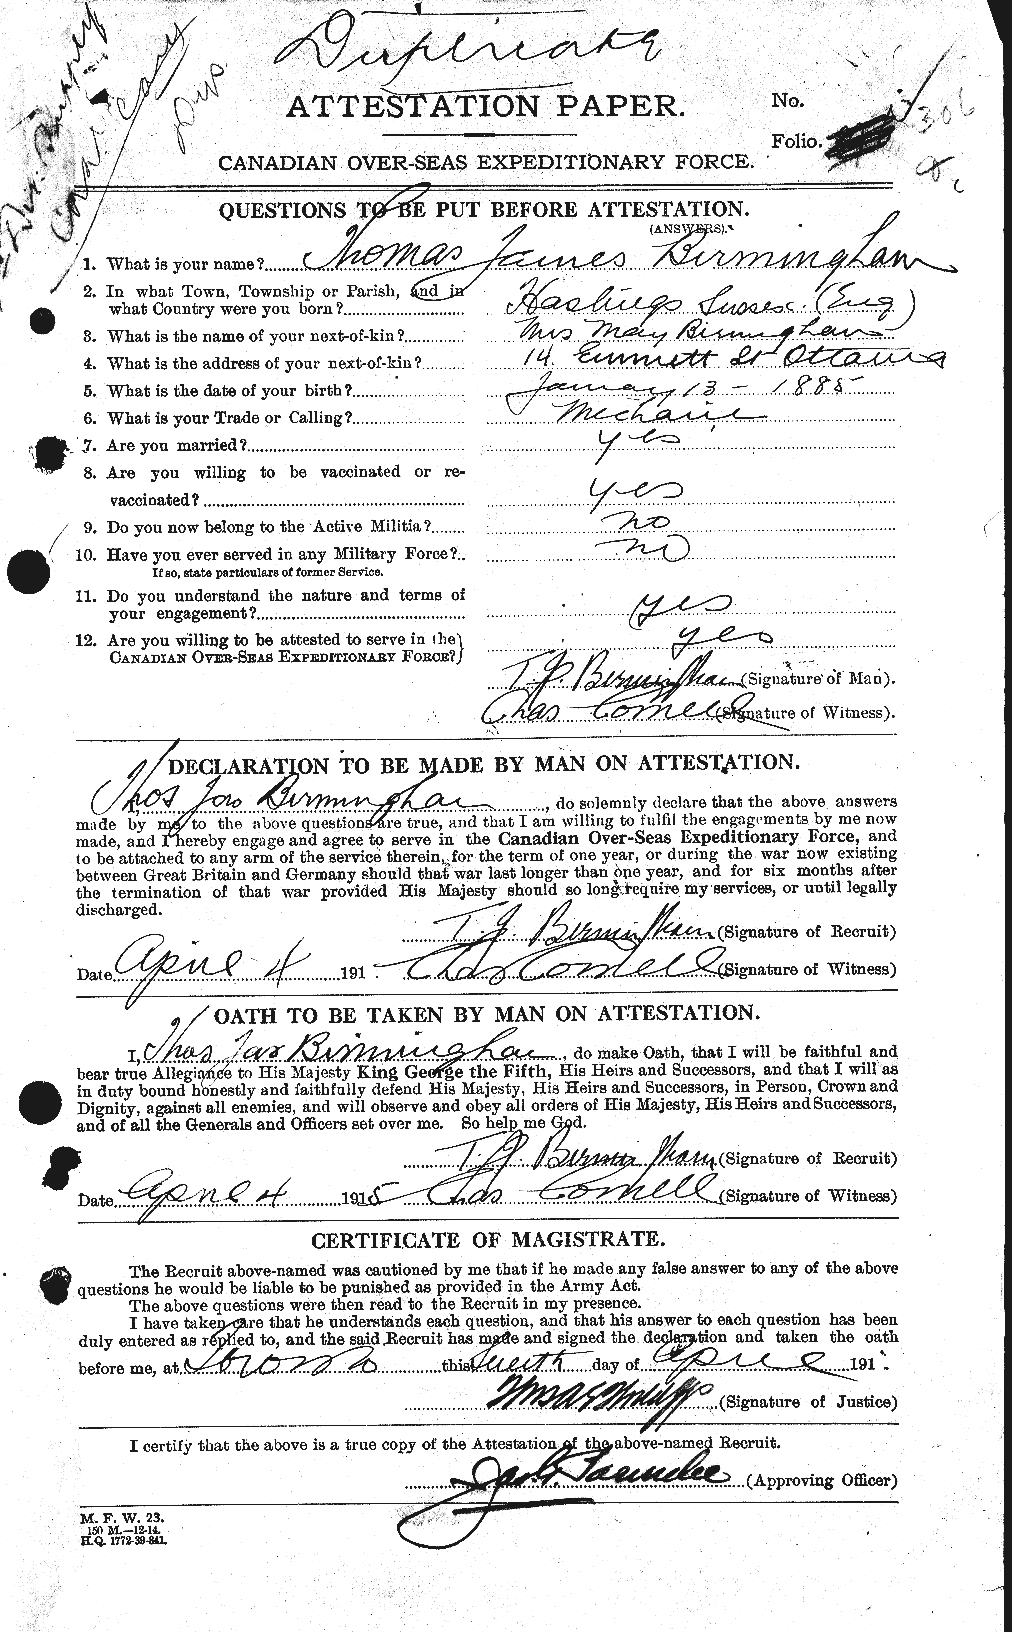 Personnel Records of the First World War - CEF 243945a